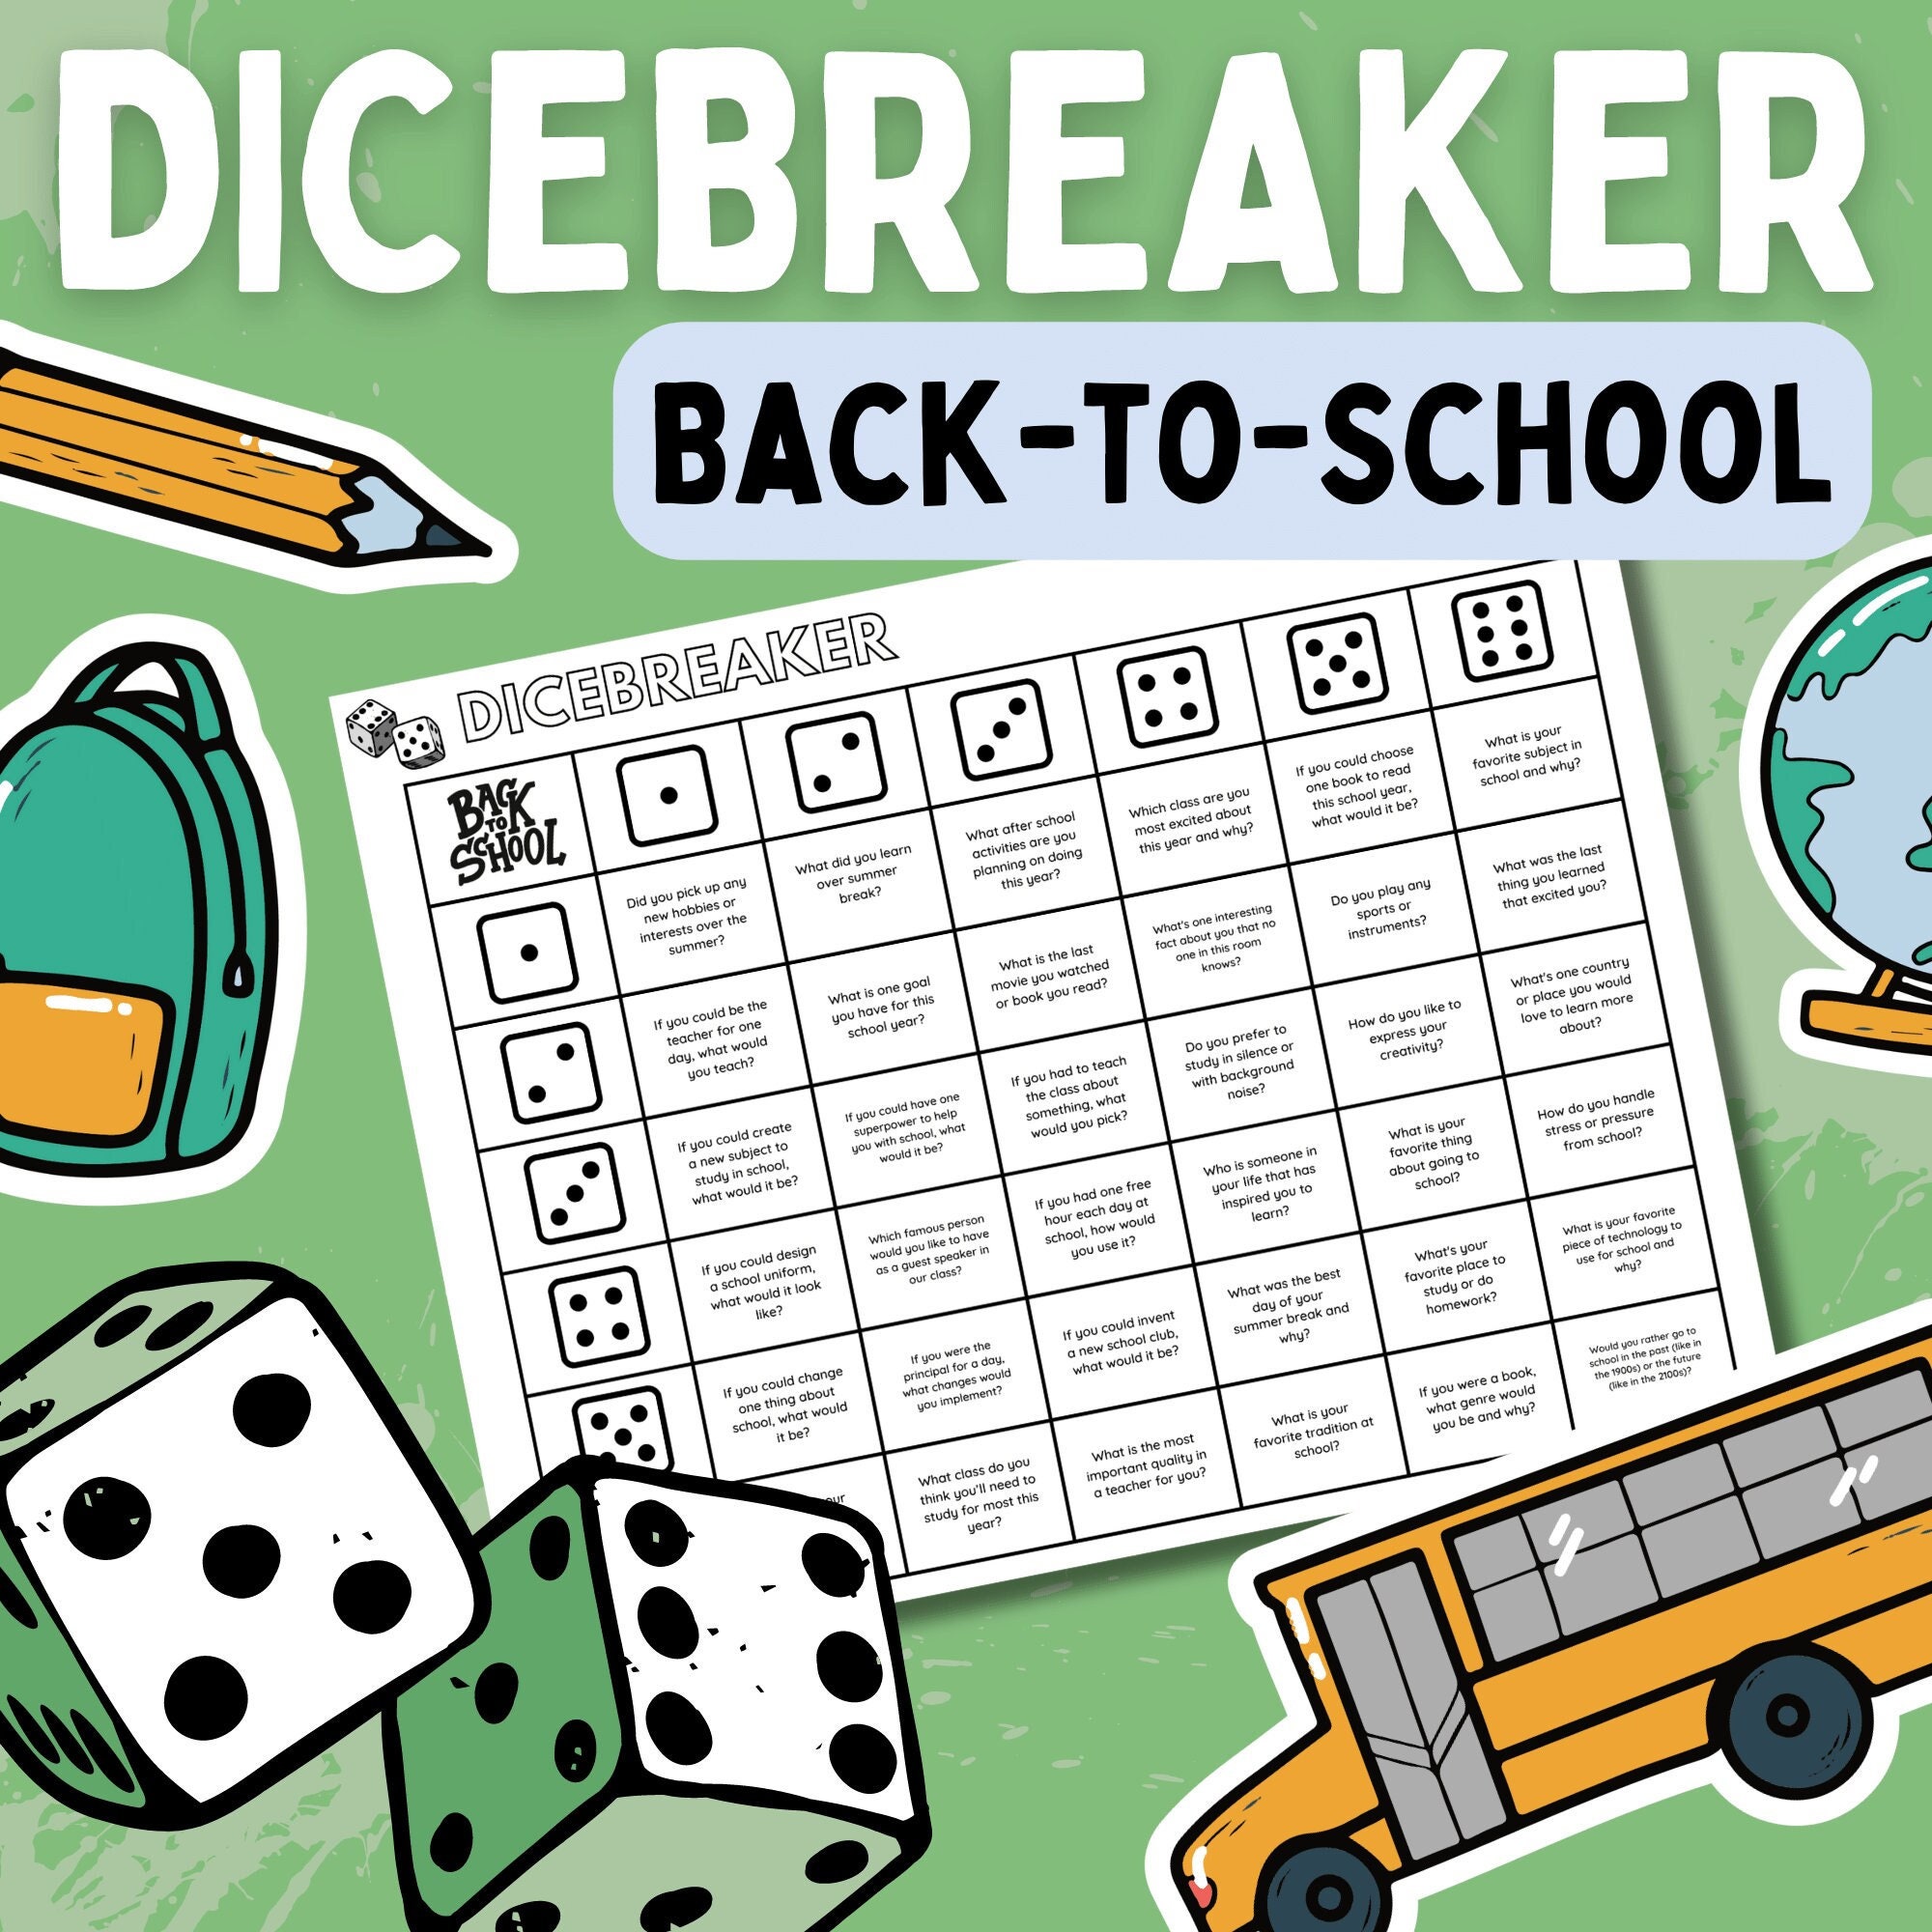 Collaborative Icebreaker - Back to School Scatter Game